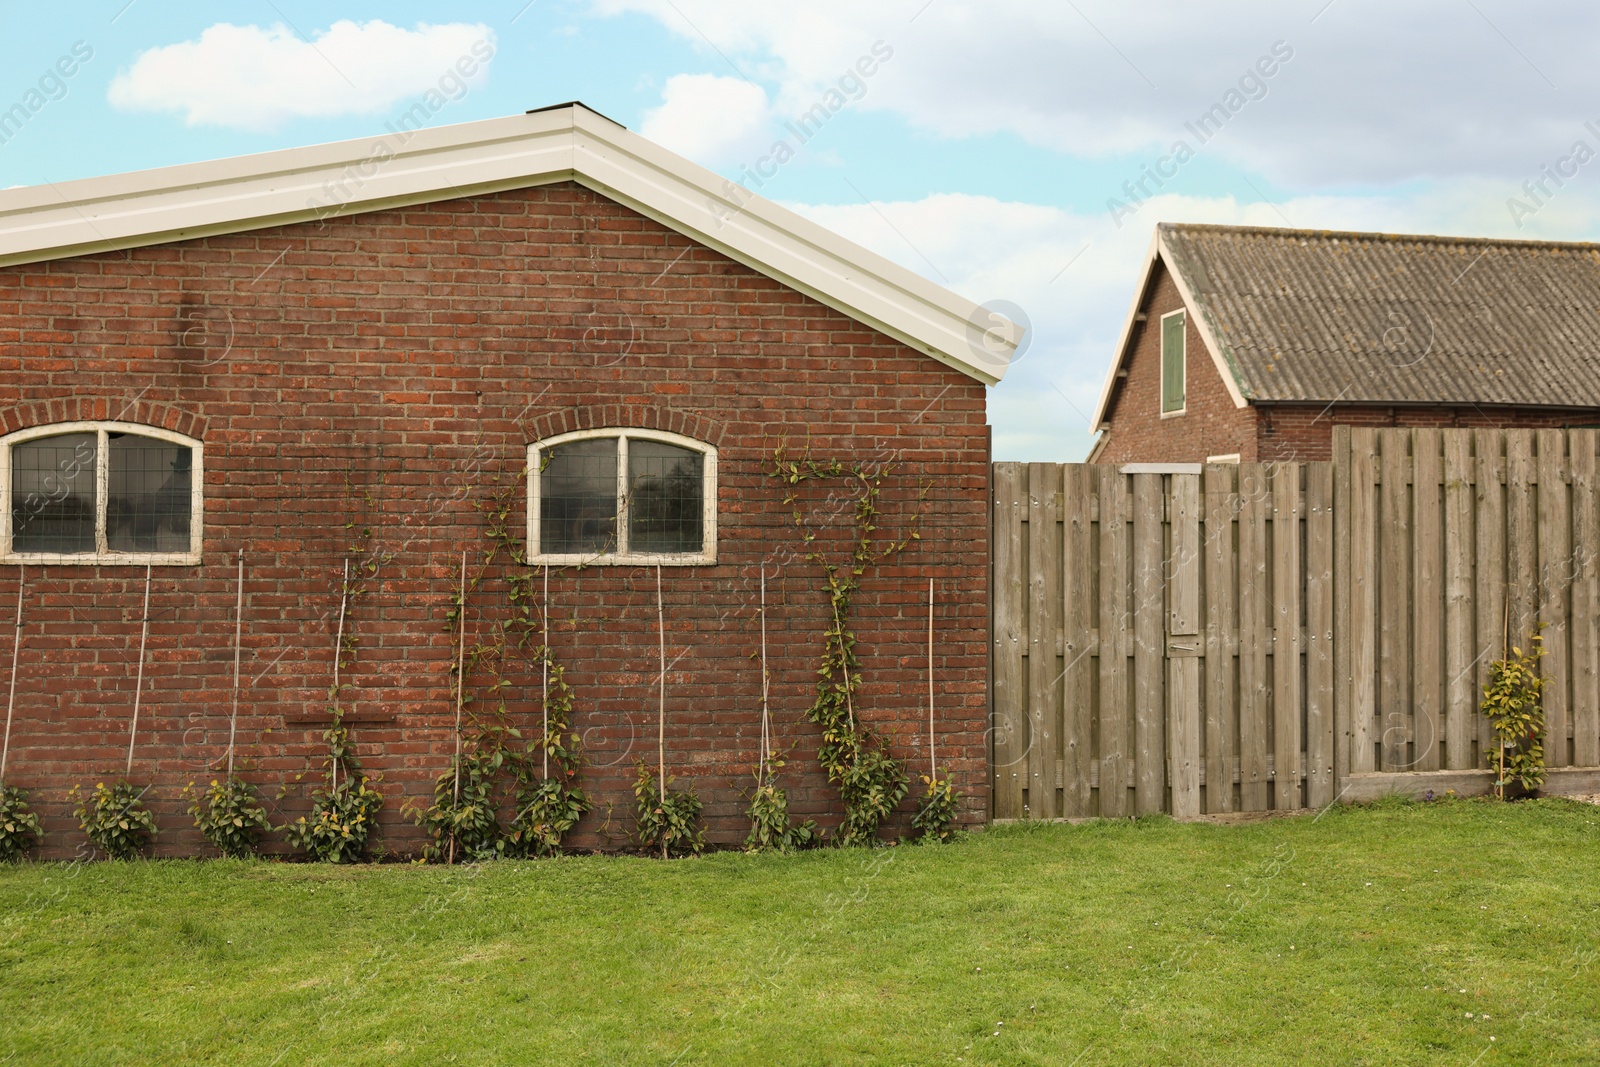 Photo of Spacious backyard with lush green grass, wooden fence and climbing plants growing on building wall